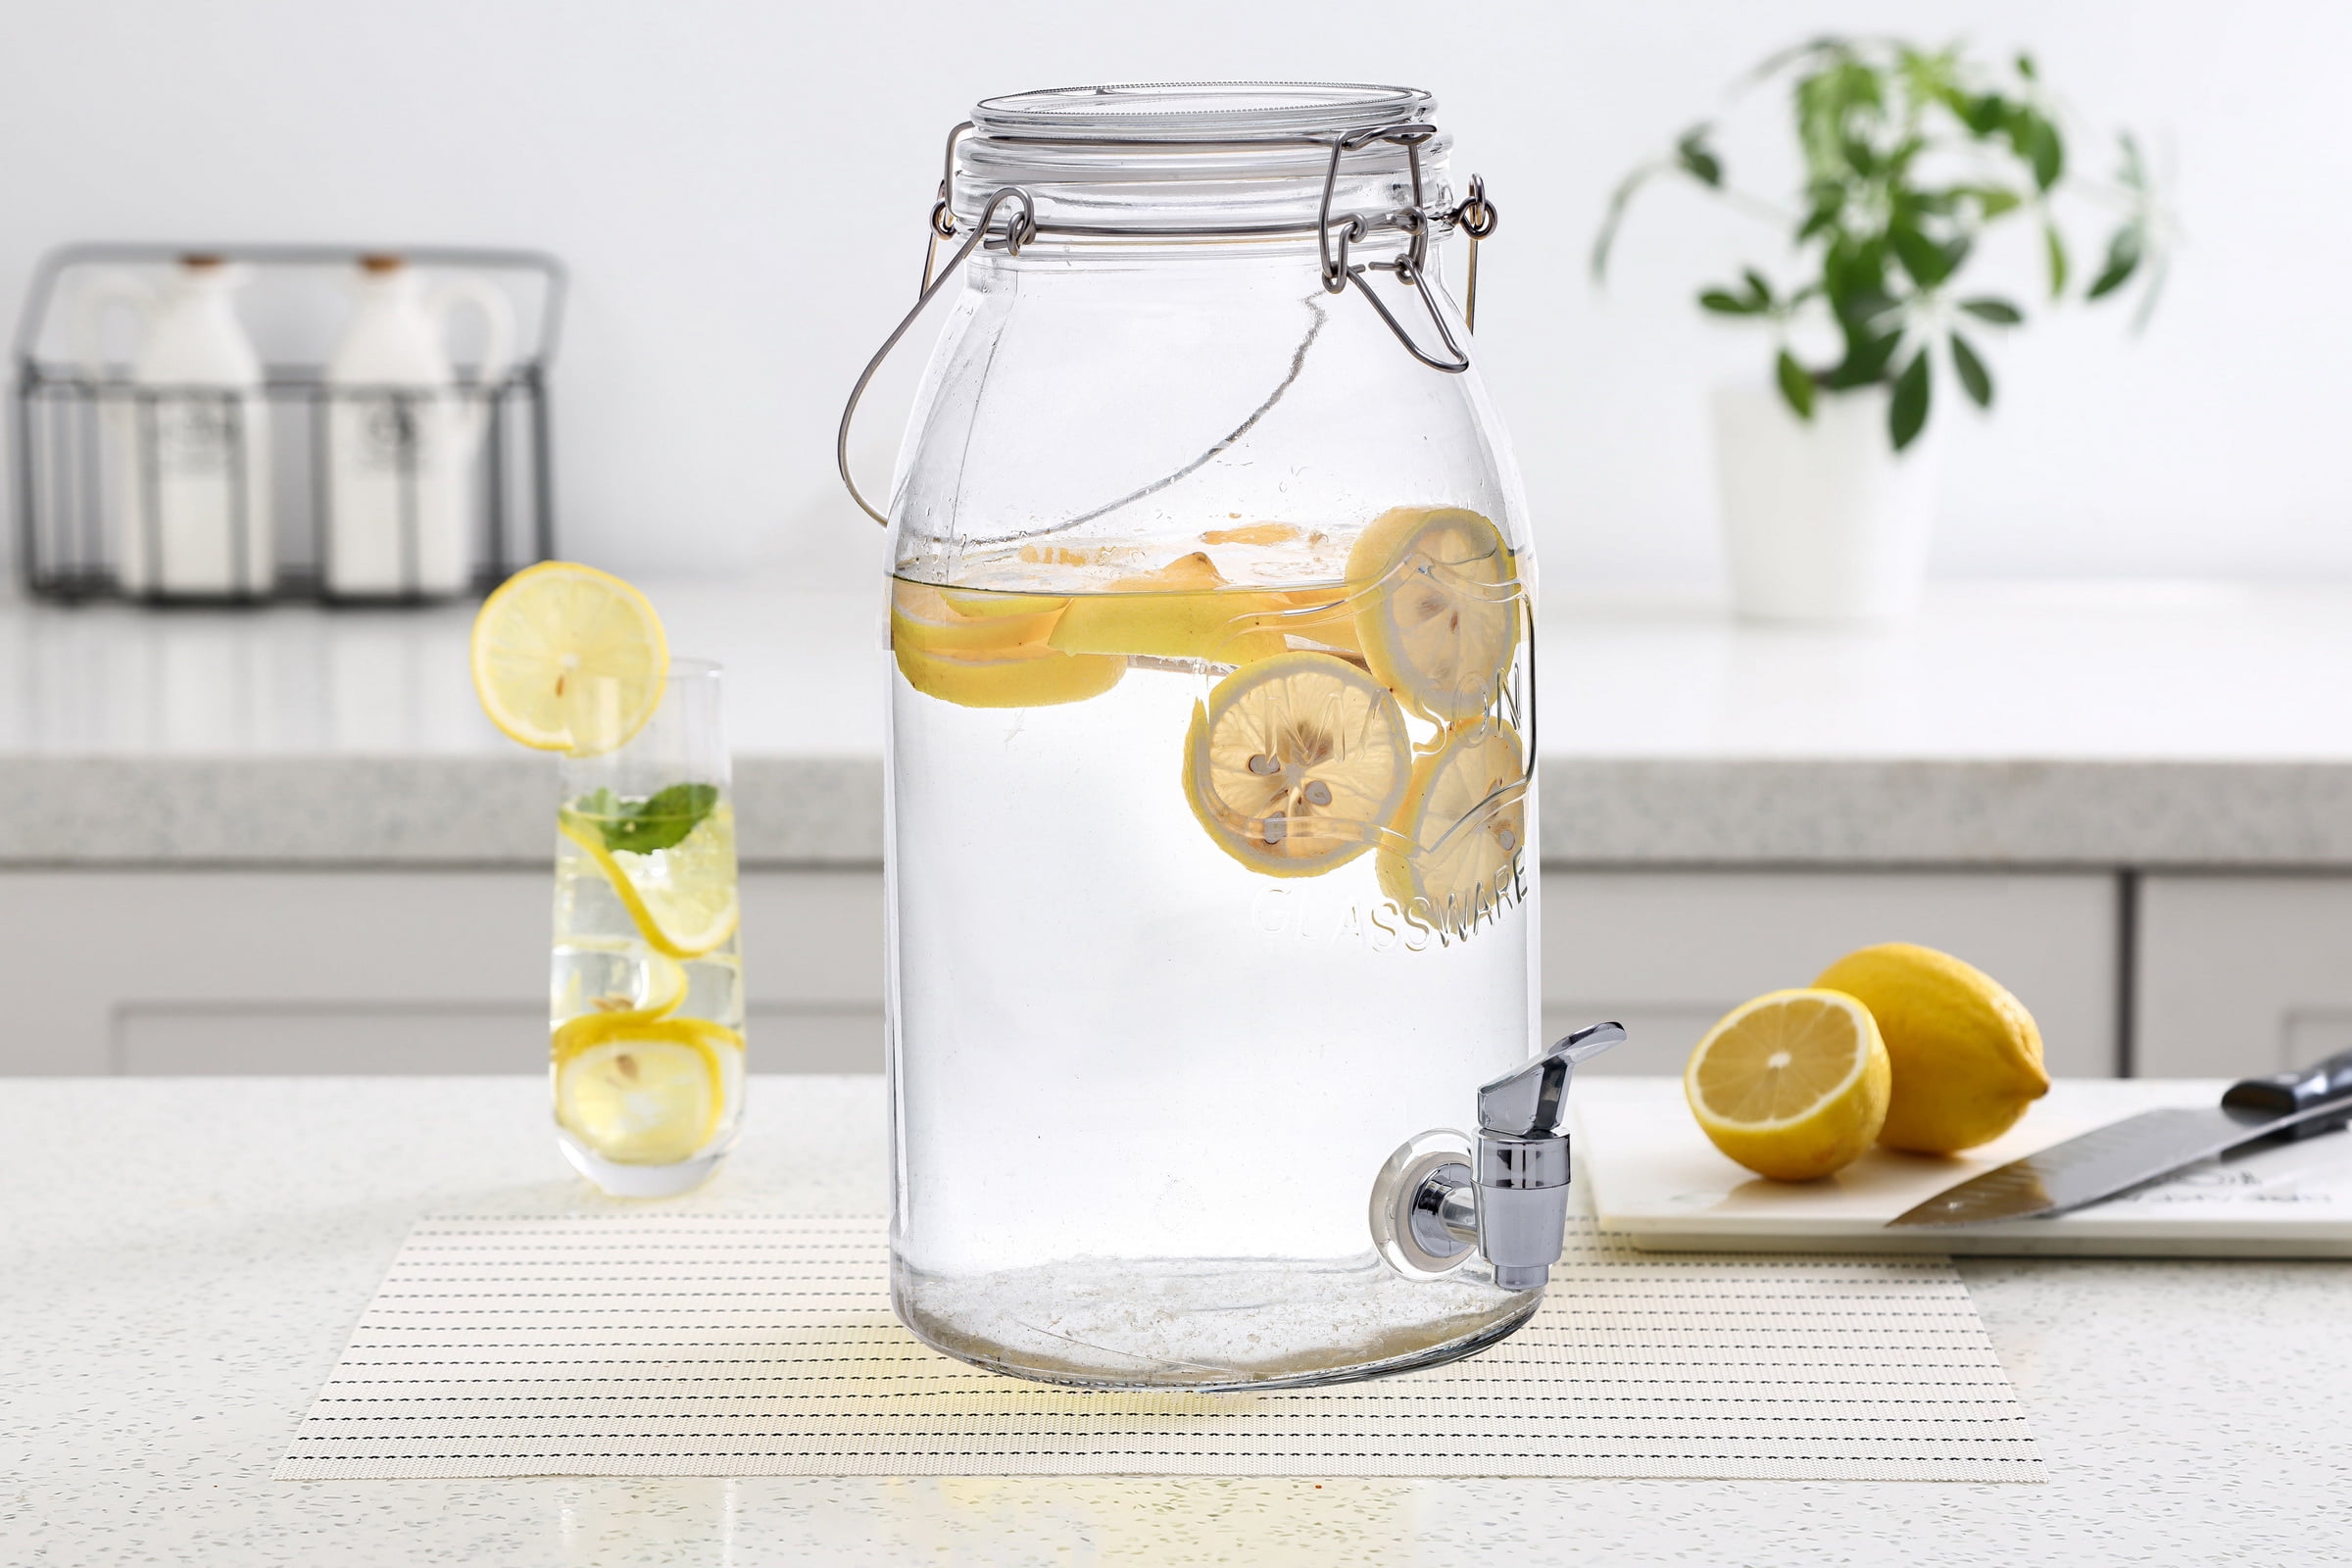 BriSunshine 1.9 Gallon/7L Round Beverage Dispenser,Stainless Steel Drink  Dispeners with Spigot and Ice Container,Jar Jug for Lemonade Tea Water